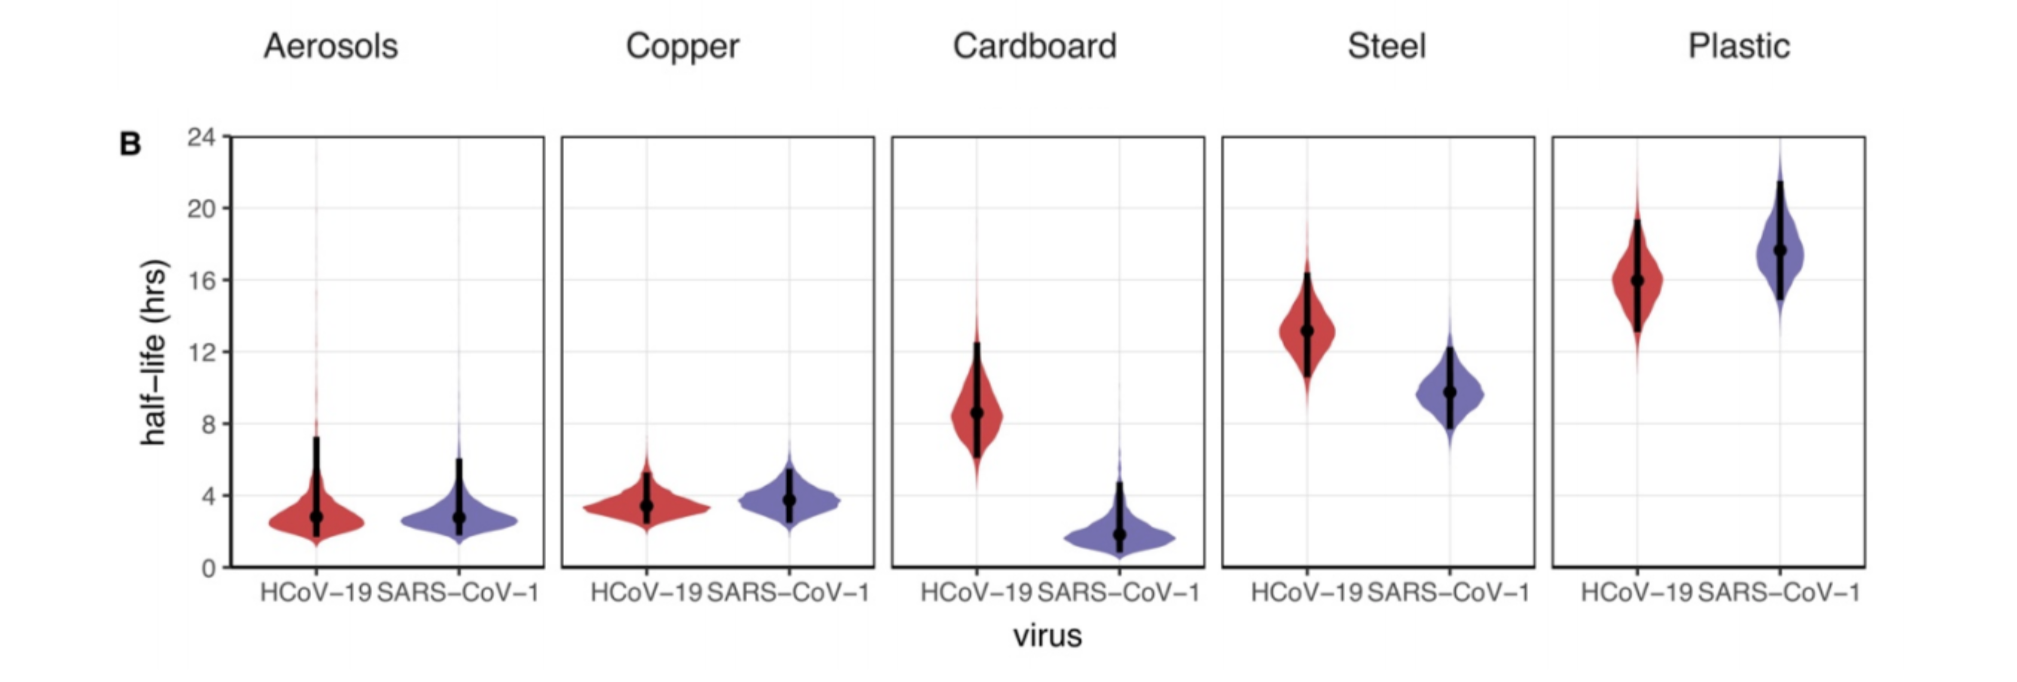 Graph illustrating the half life of viruses on different surfaces